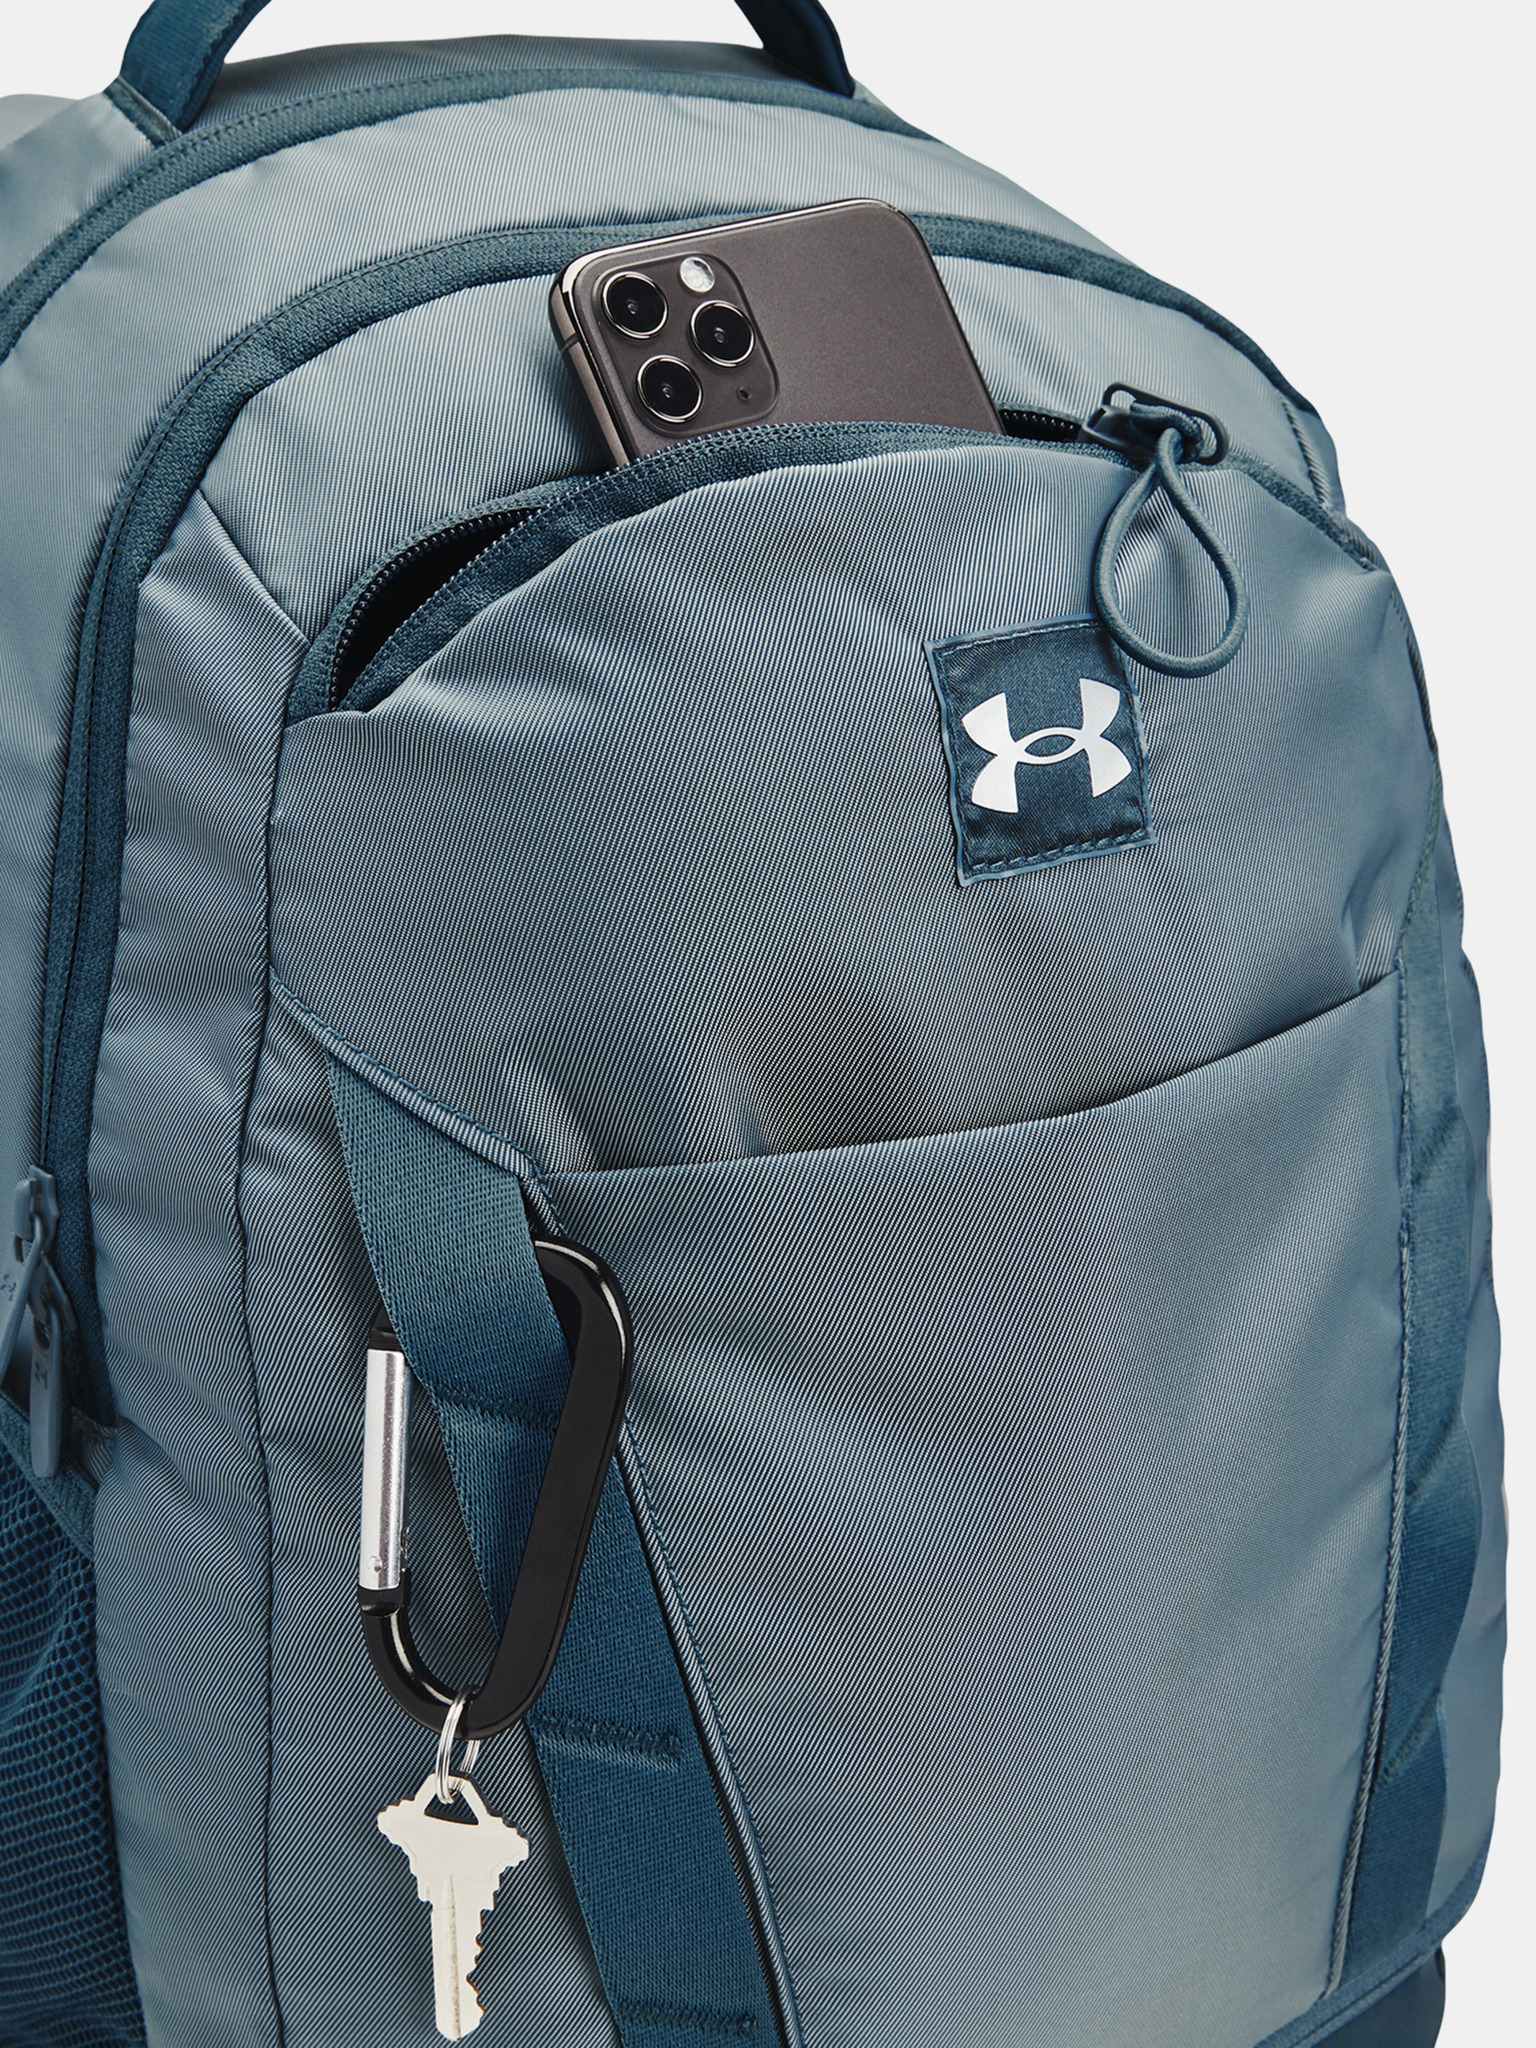 Under Armour Hustle Signature Backpack